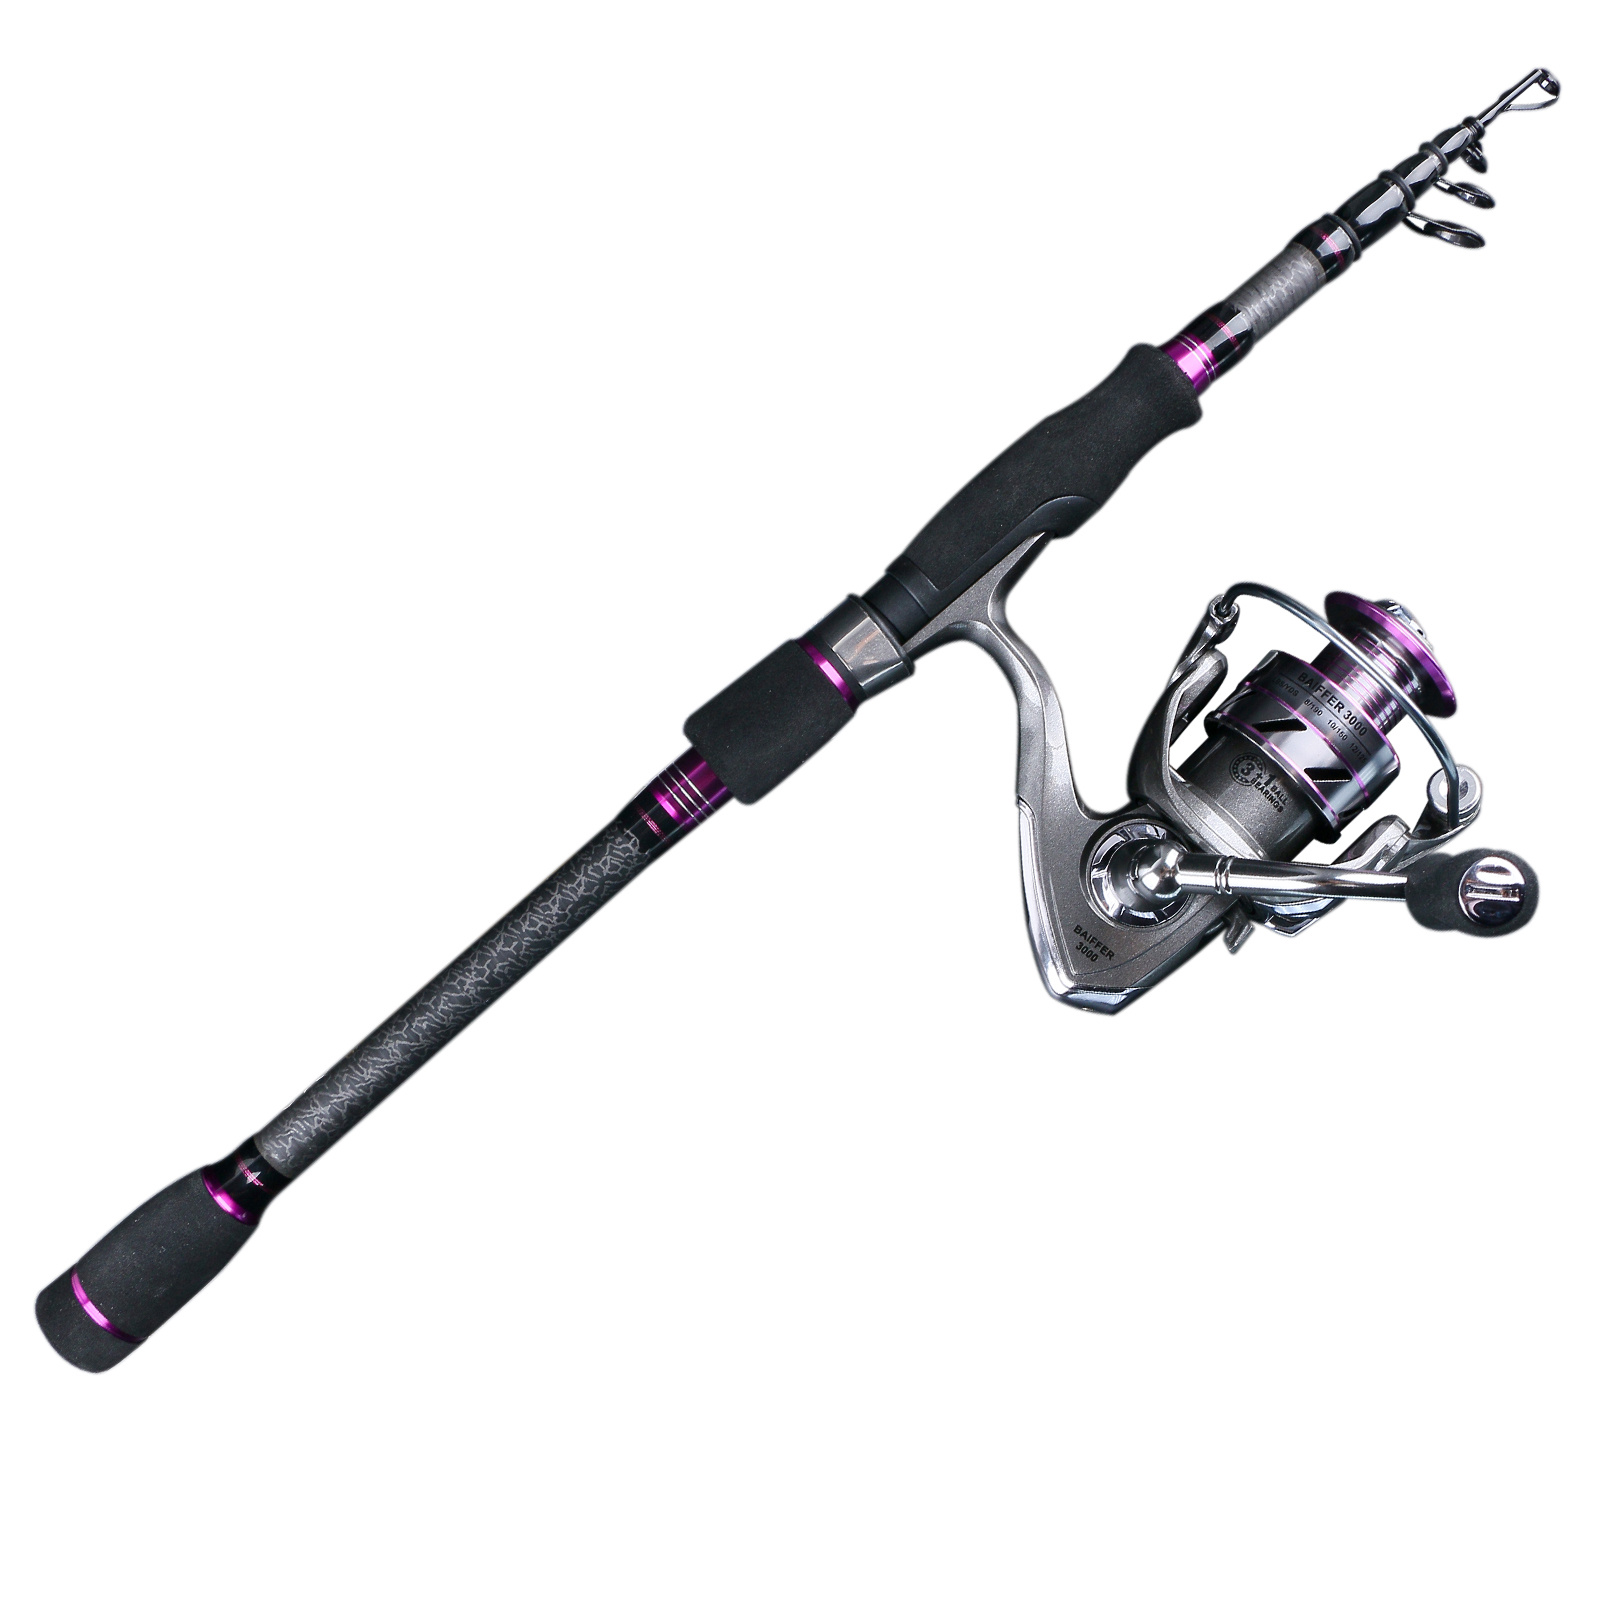 Travel Fishing Pole and Reel Combo Carbon Fiber Fishing Rods